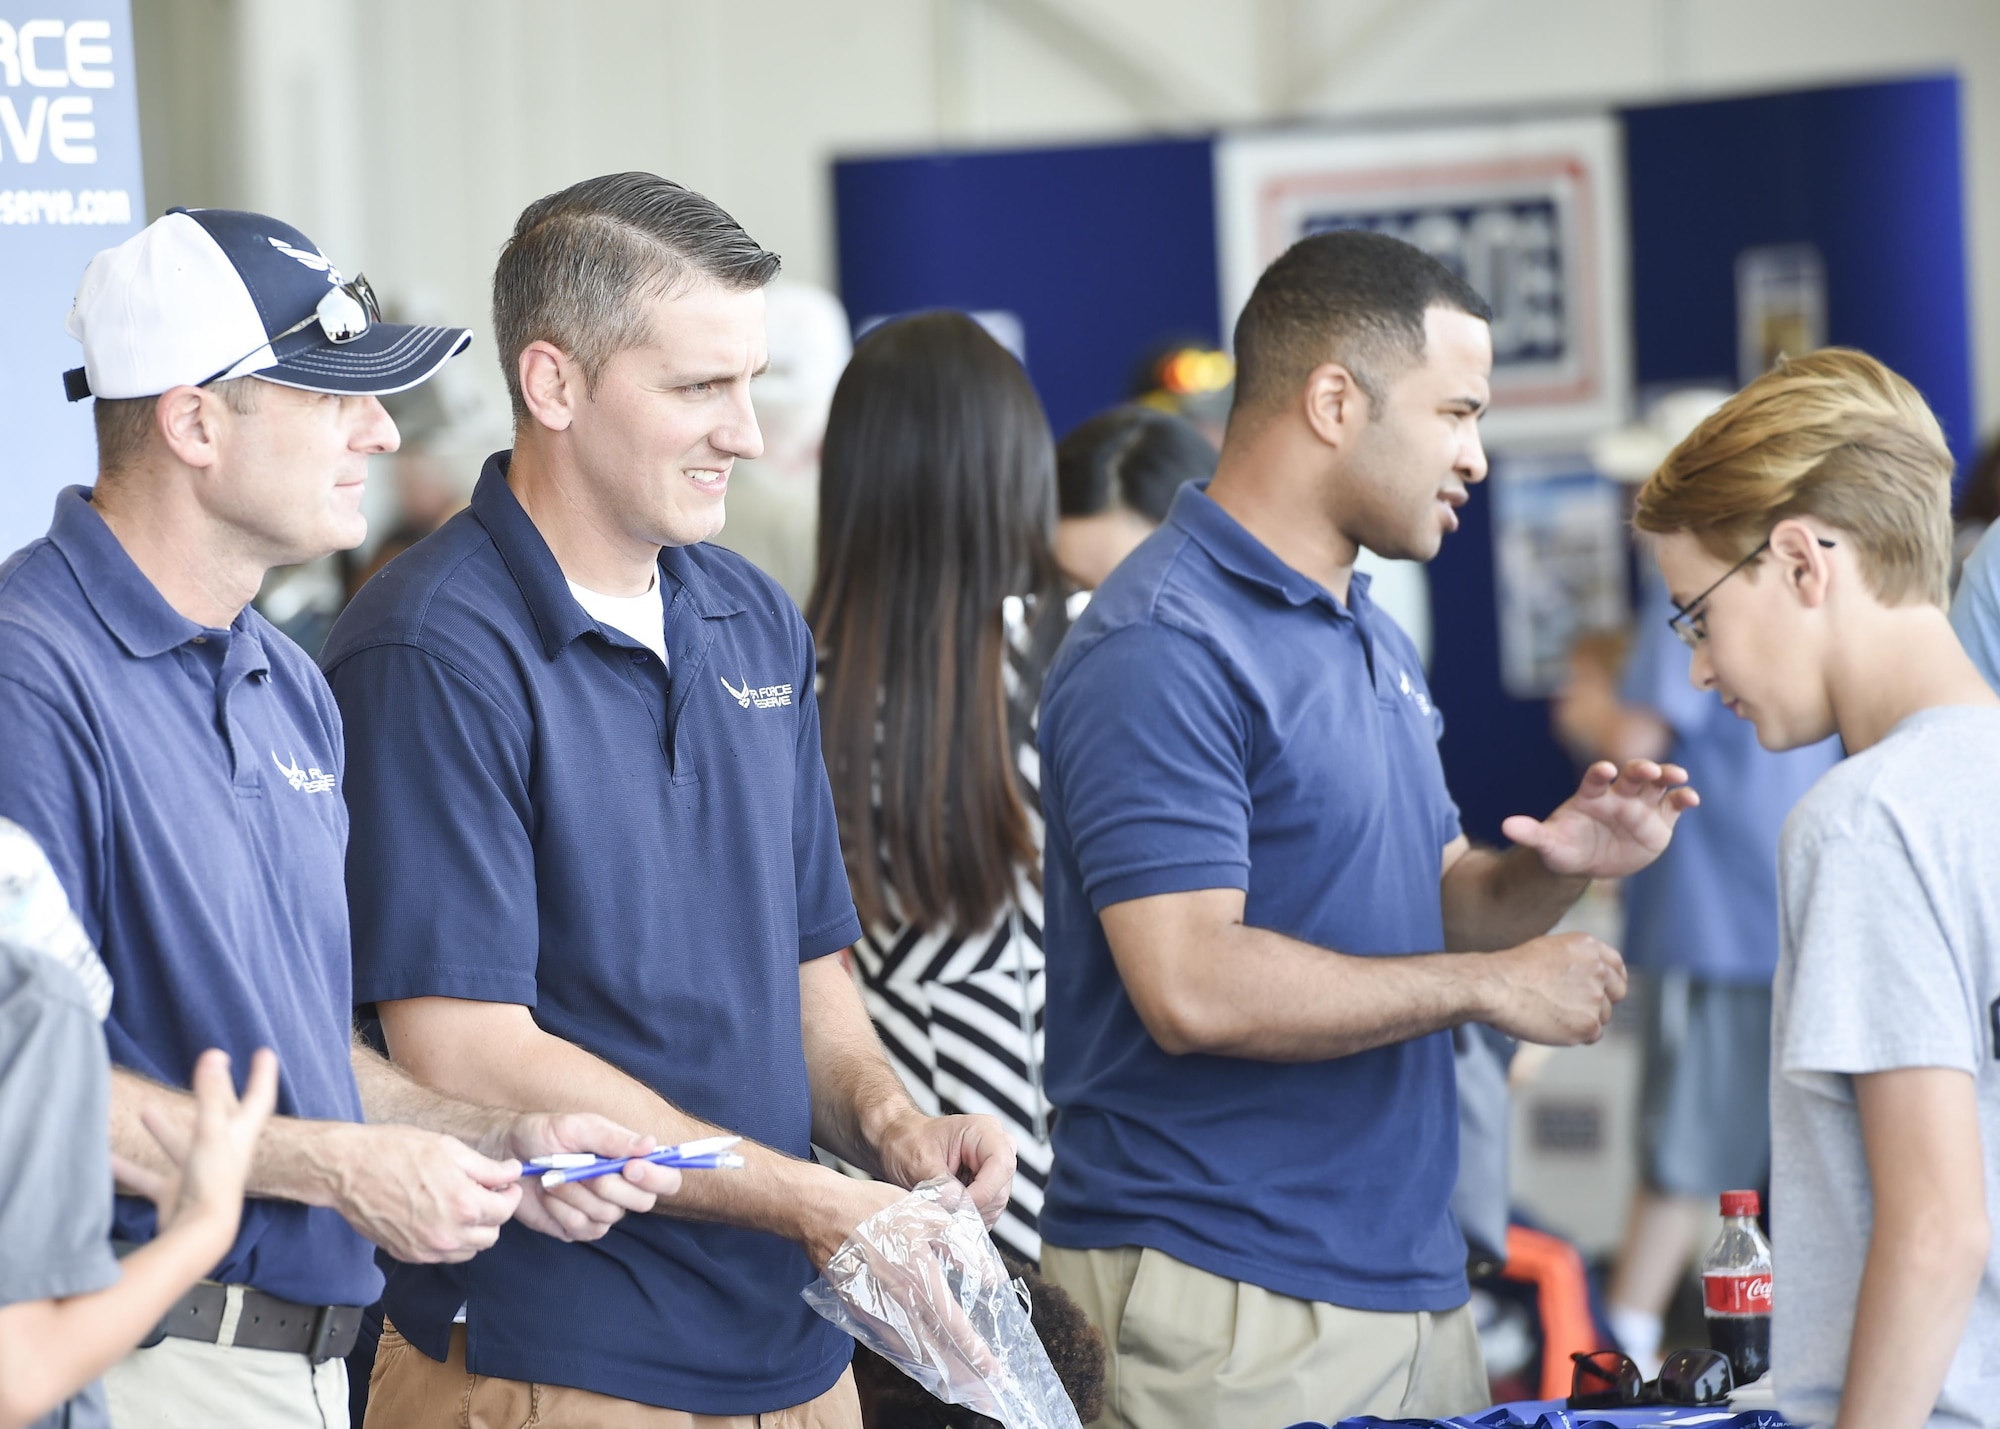 Senior Master Sgt. John Wood, Tech. Sgt. Jason Corradi and Master Sgt. Joe Poltor, all recruiters for the 910th Airlift Wing, talk with young open house guests about the opportunities in the Air Force Reserve here, June 18, 2016. The Youngstown Air Reserve Station Open House drew approximately 7000 guests to see the equipment, mission and personnel of YARS. The recruitment staff generated more than 30 strong leads for potential recruits during the event. (U.S. Air Force photo/Eric White)